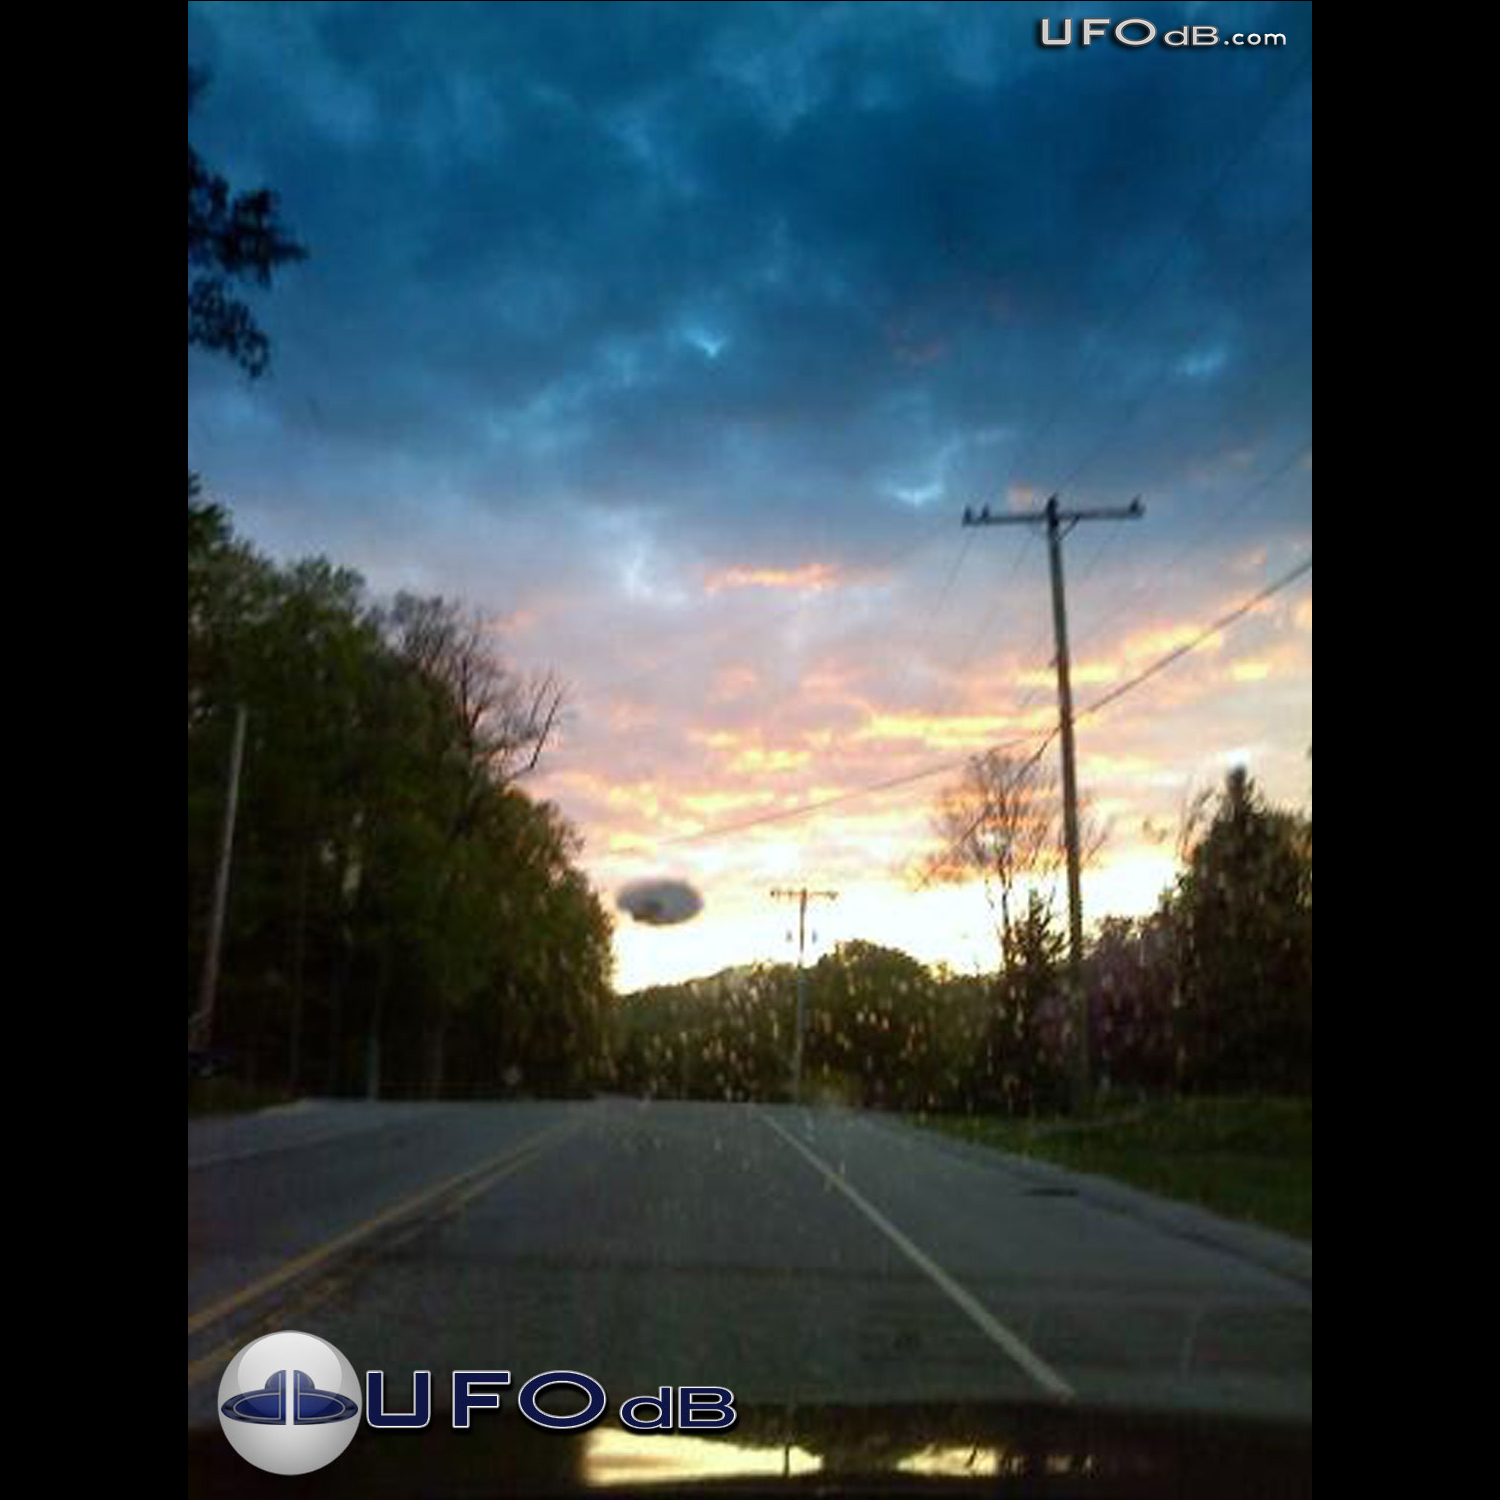 Car driver captures very fast UFO on picture | Michigan | April 8 2011 UFO Picture #264-1